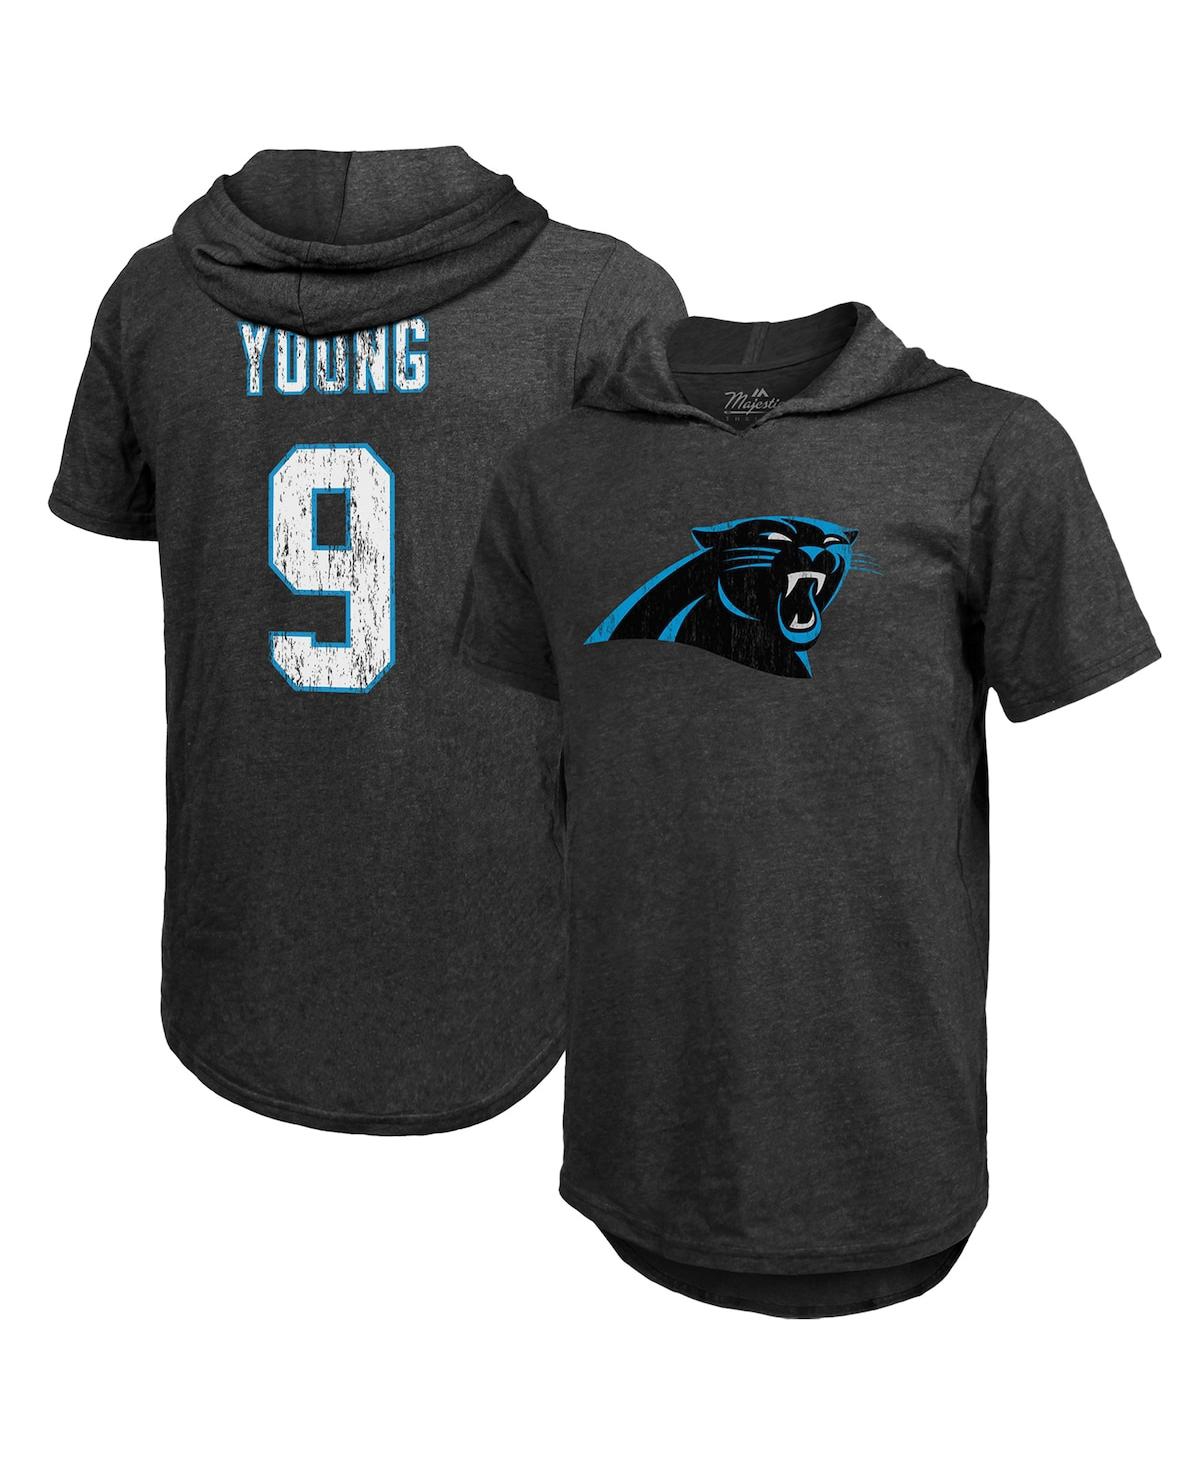 Men's Majestic Threads Bryce Young Black Carolina Panthers Player Name and Number Tri-Blend Hoodie T-shirt - Black